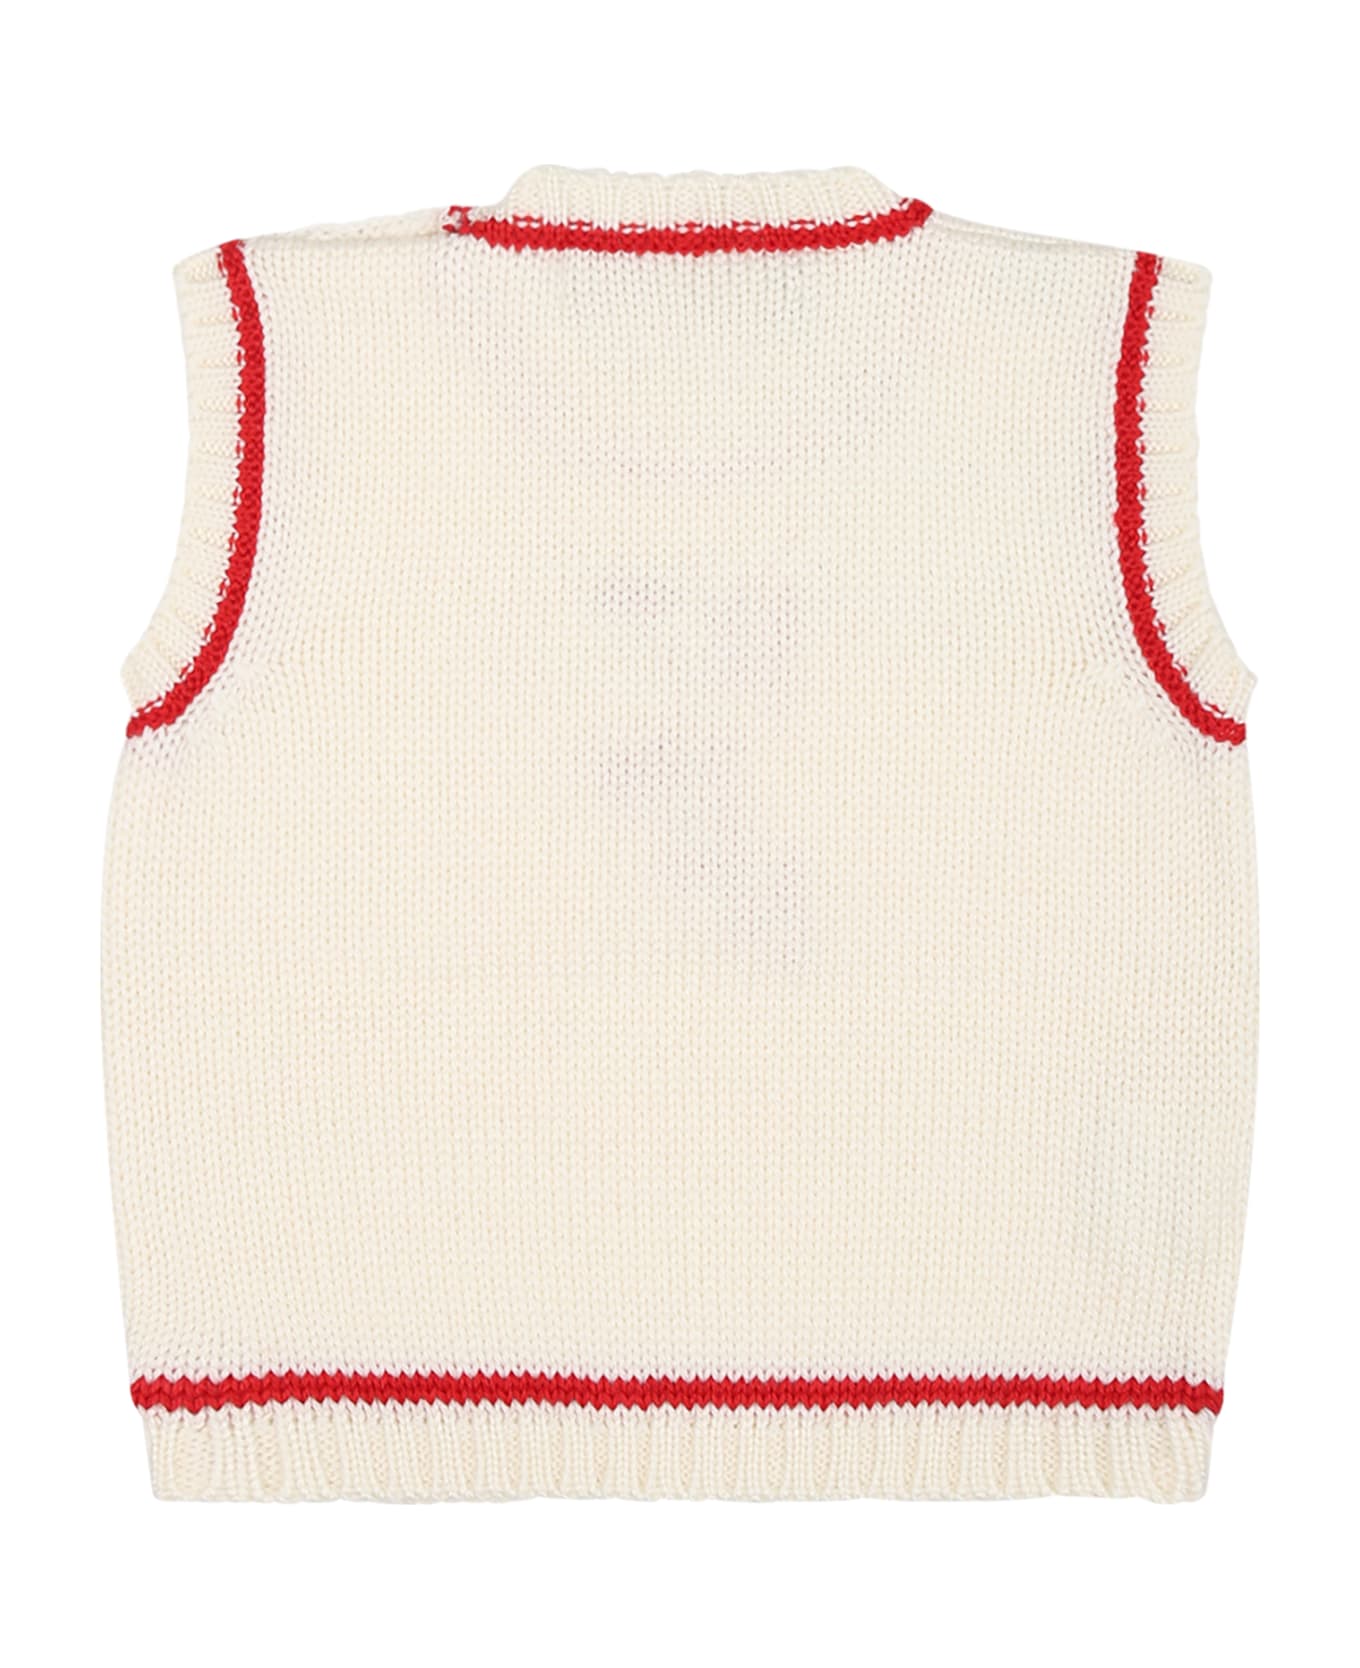 La stupenderia White Vest Sweater For Baby Boy With Writing - White